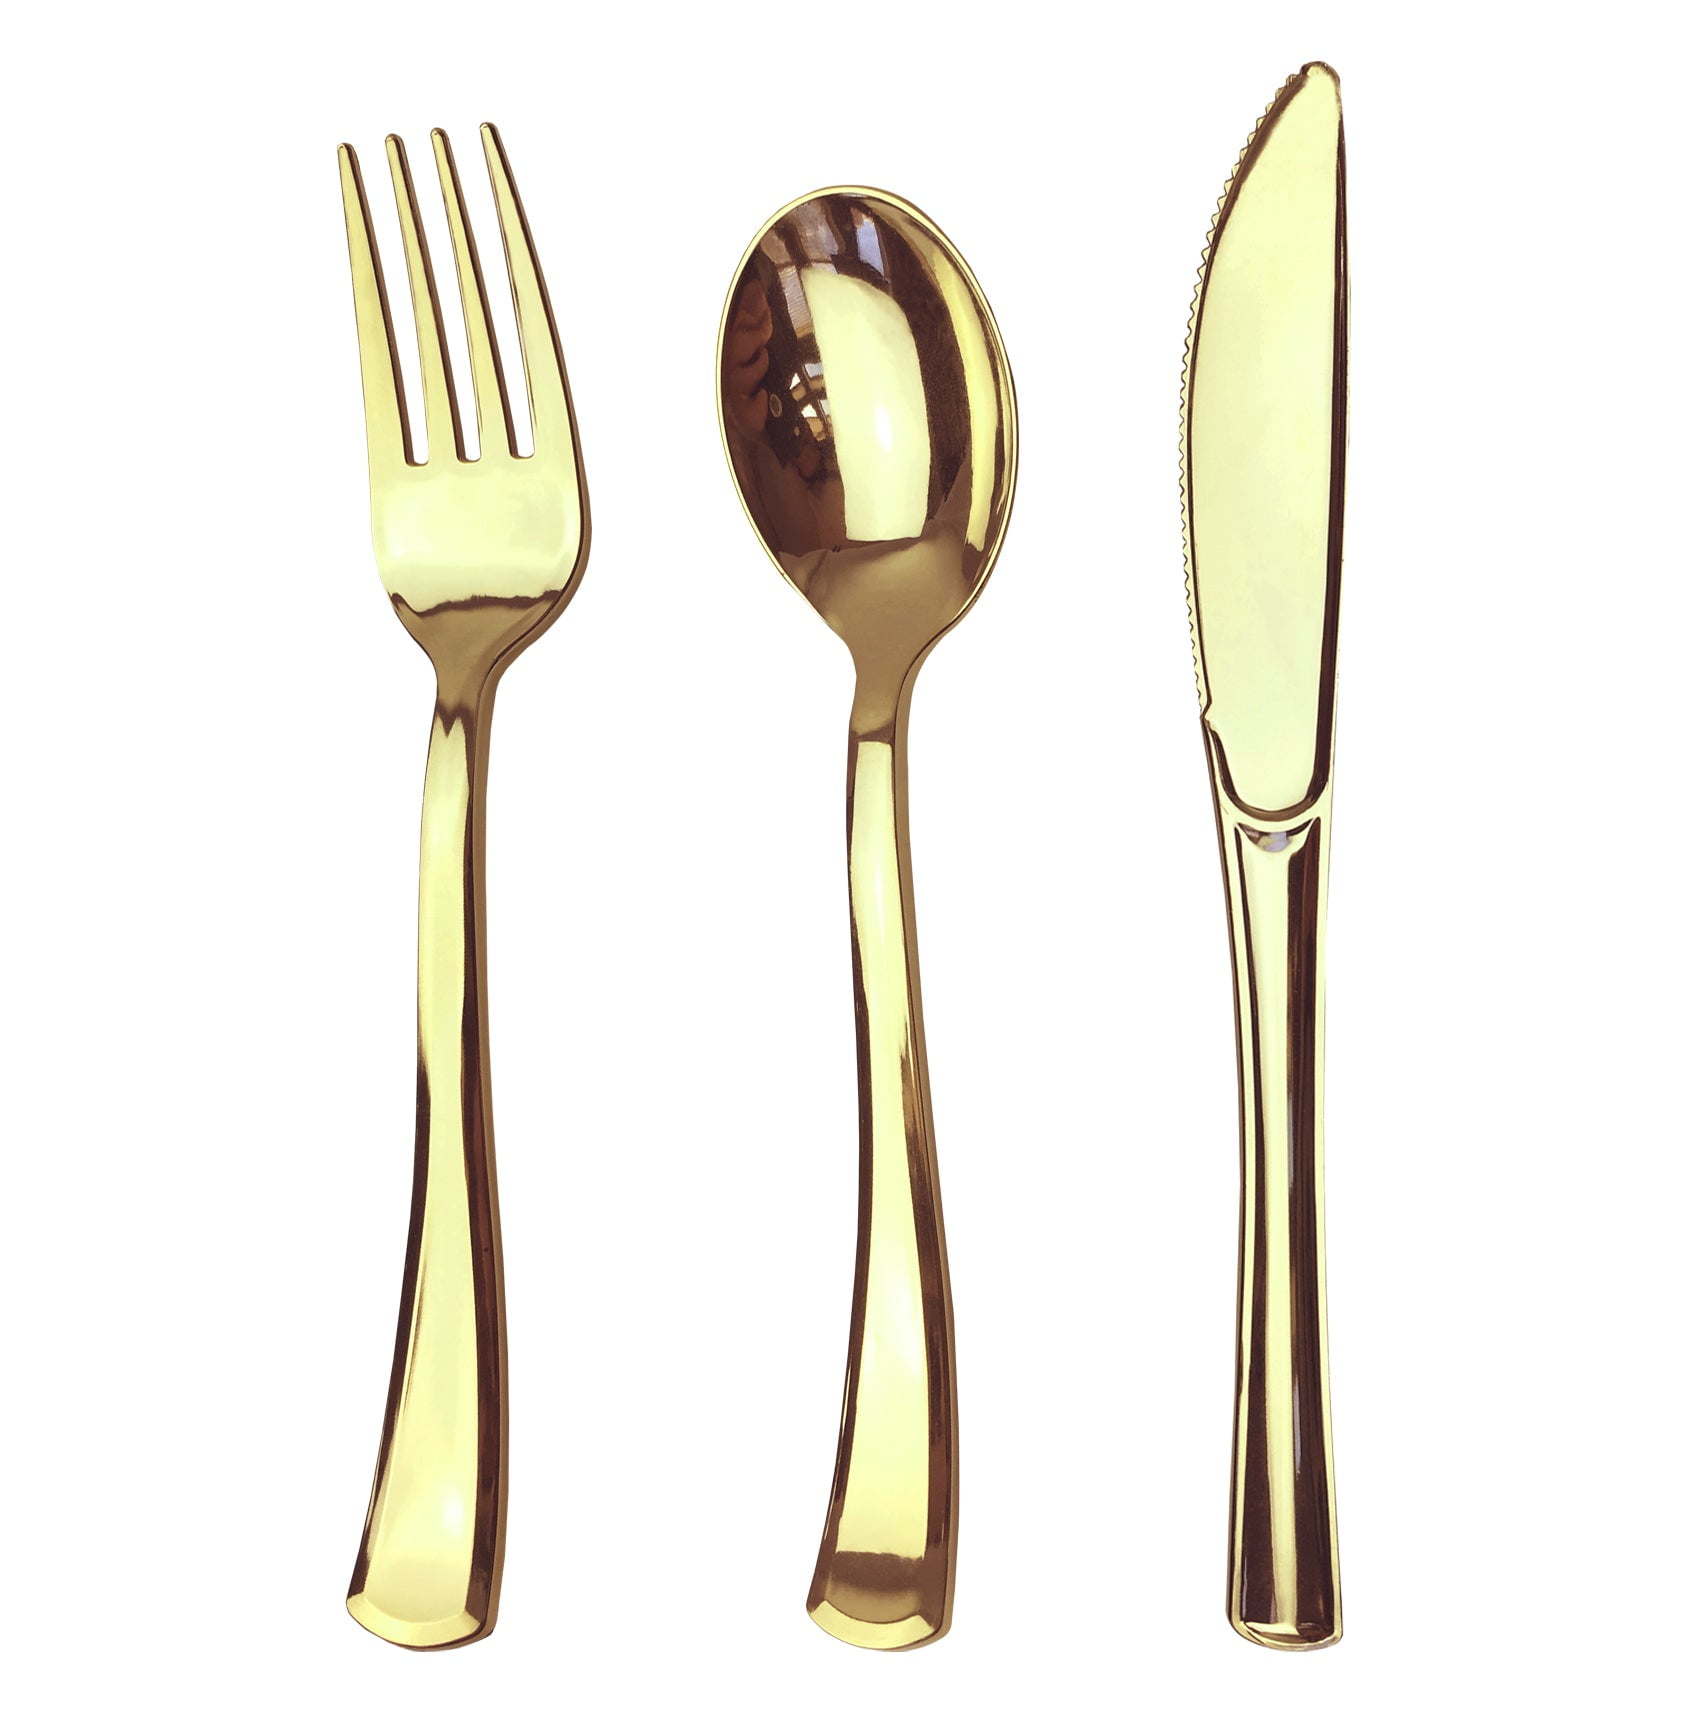 Disposable Flatware Heavy Duty Plastic Utensils Set for Catering 25 Spoons 25 Forks 25 Knives Parties FOCUSLINE 75 Pack Rose Gold Plastic Silverware Disposable Cutlery Set Dinners Weddings 